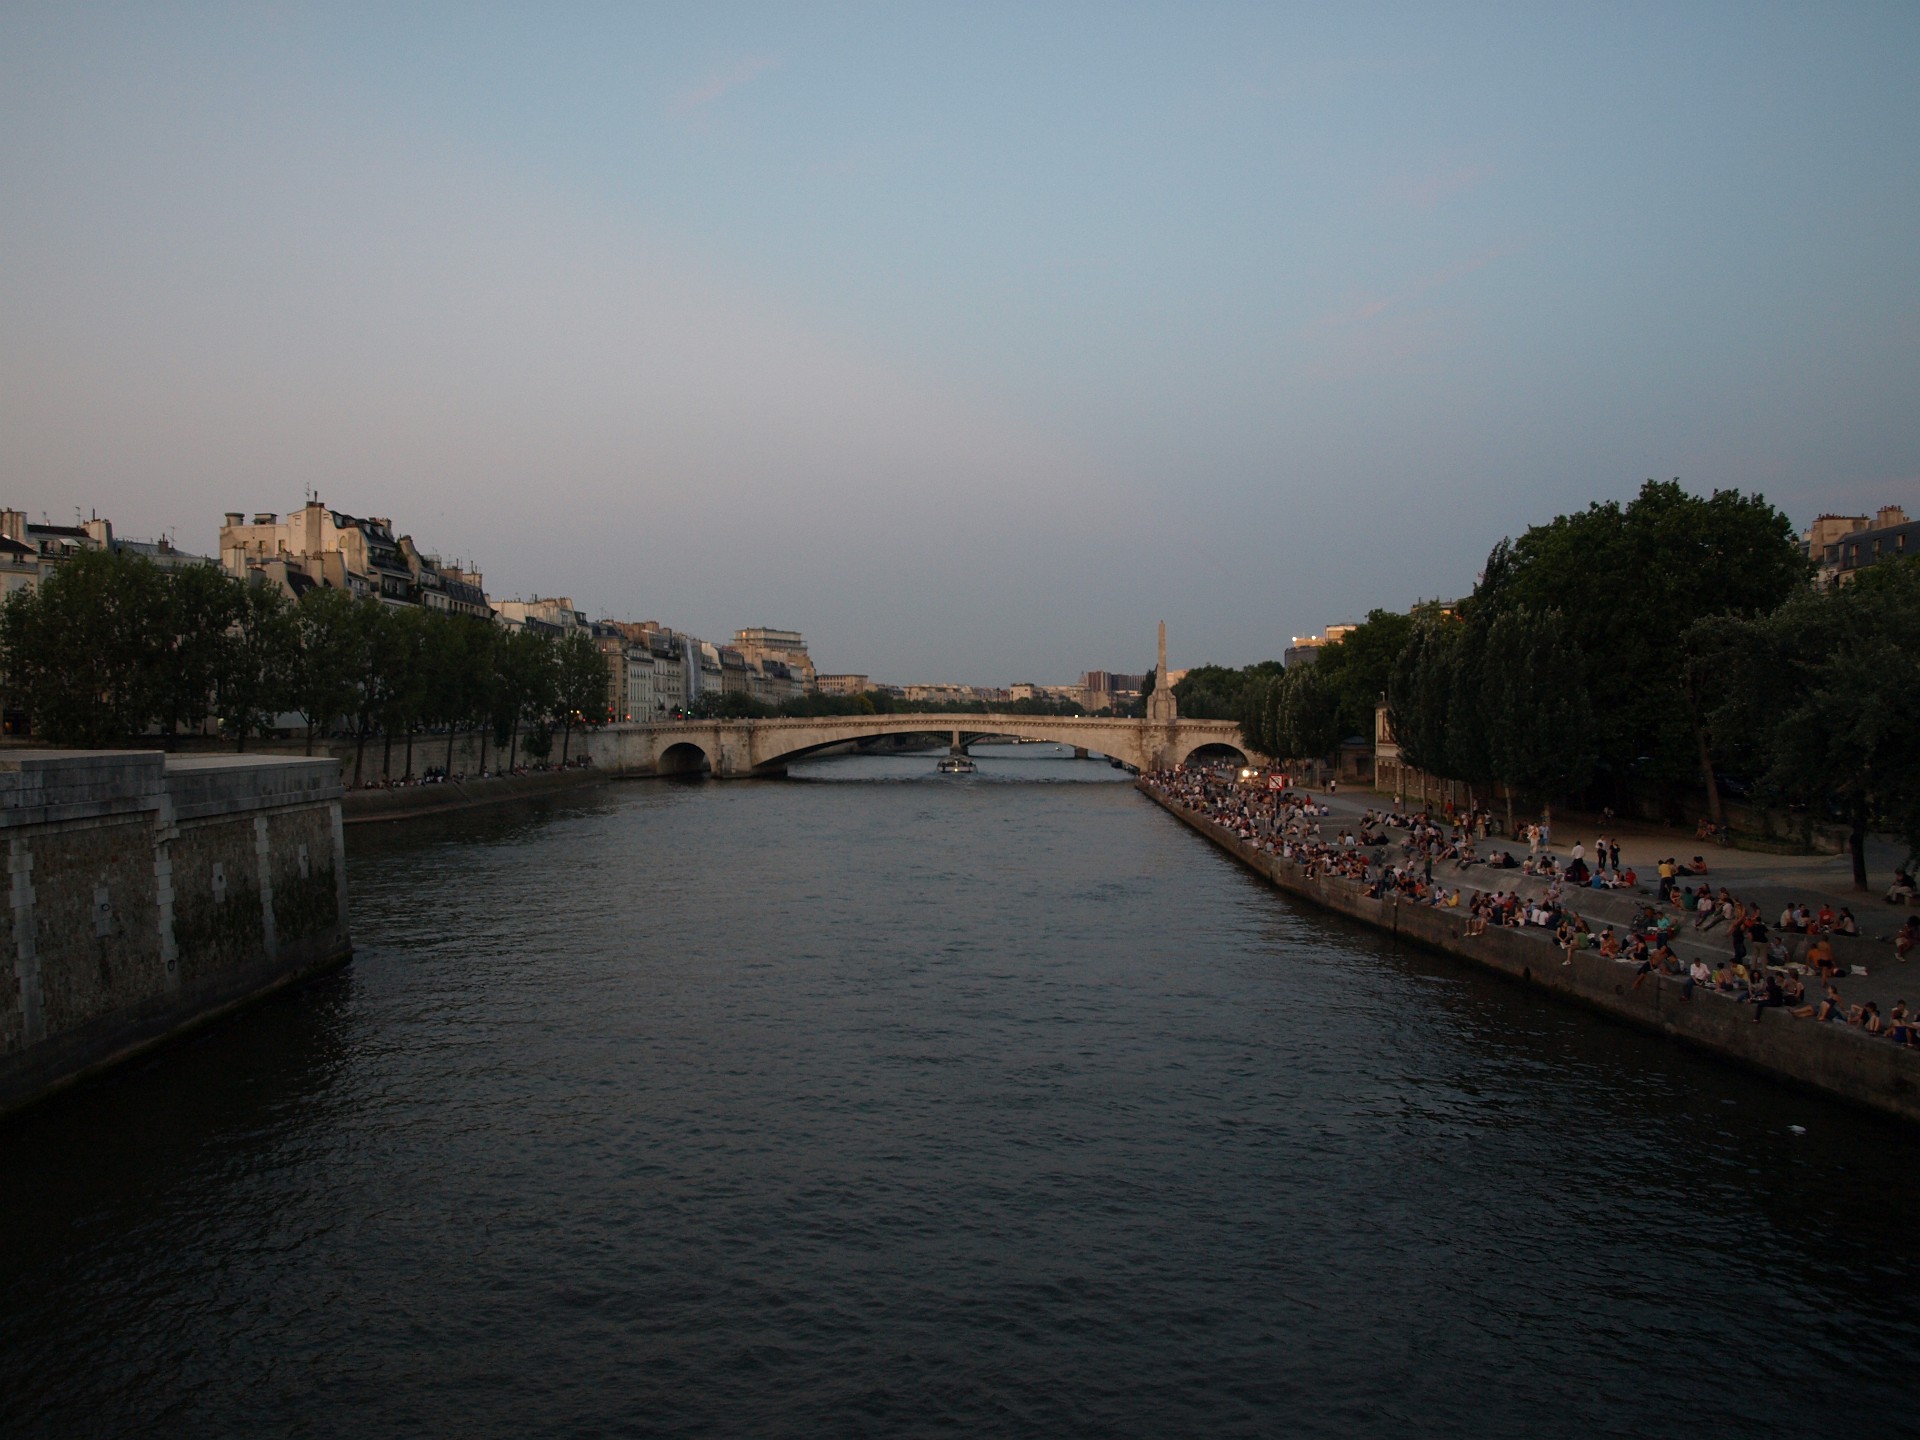 The Seine in the Evening Light